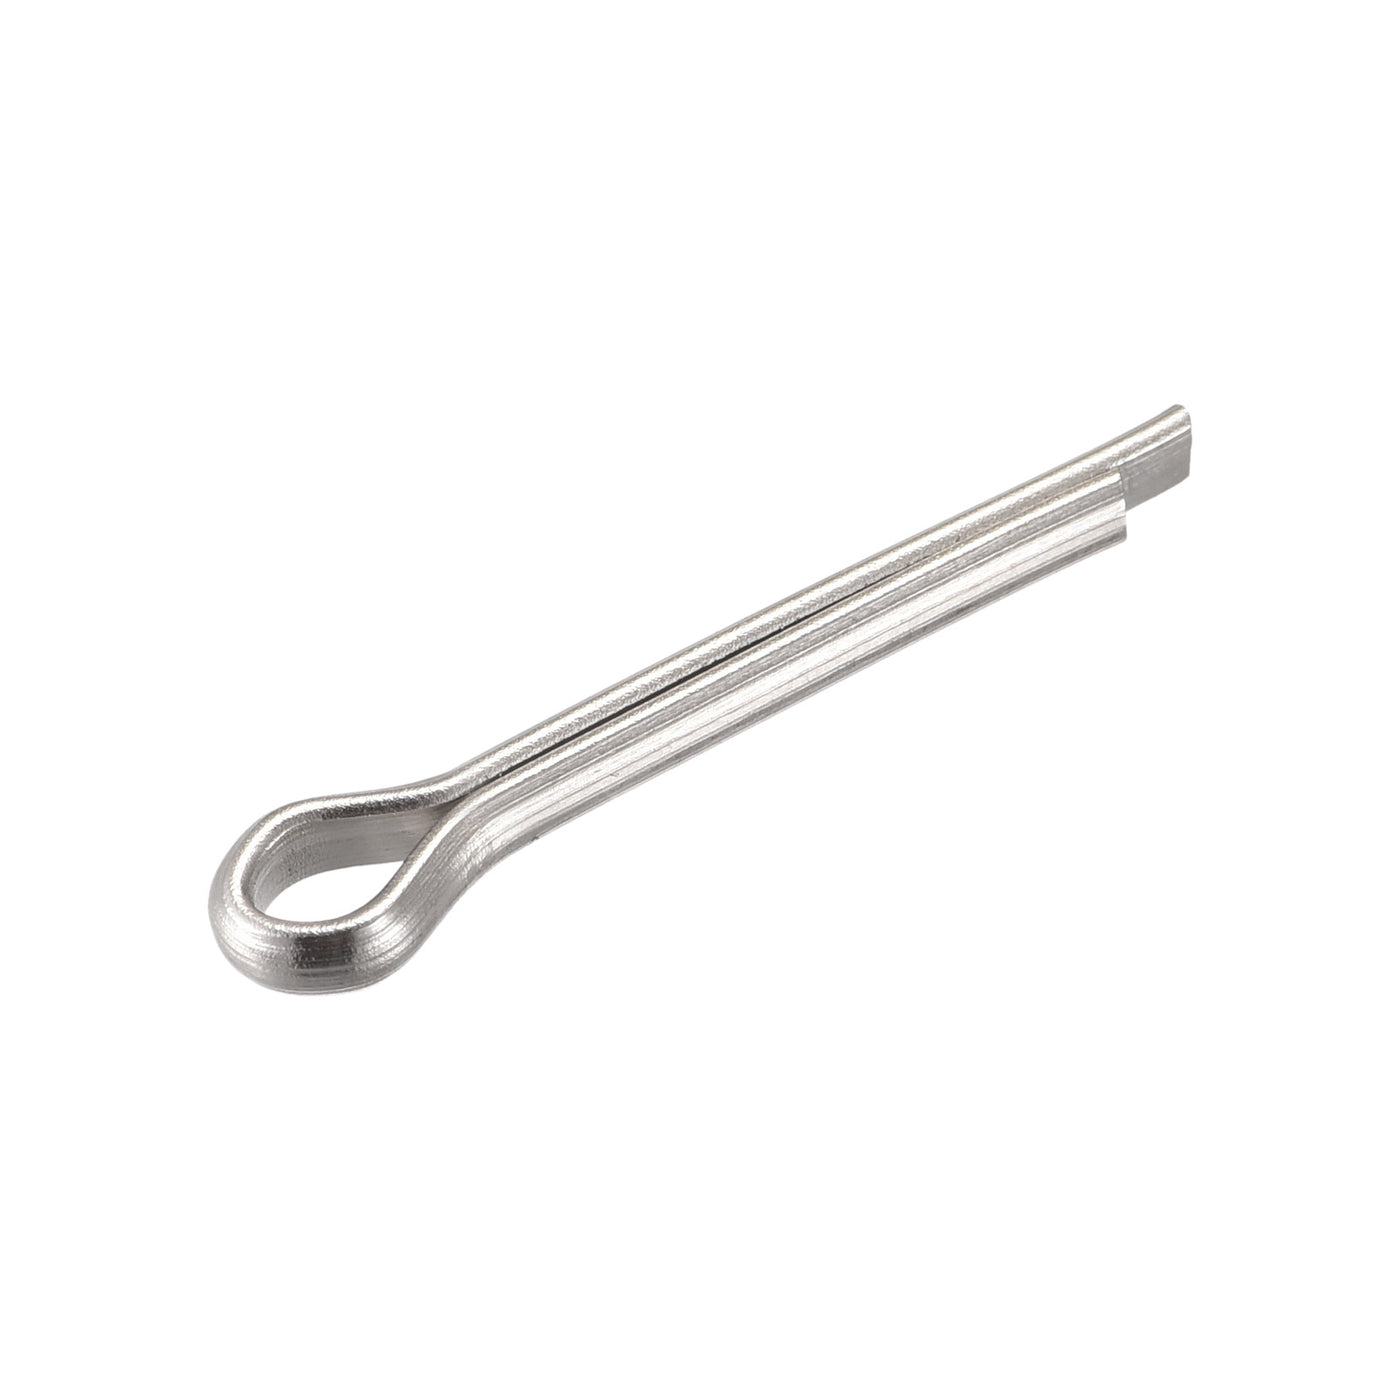 uxcell Uxcell Split Cotter Pin, 4mm x 25mm Stainless Steel Clip Fastener Fitting for Automotive, Mechanics, Silver Tone, 5Pcs